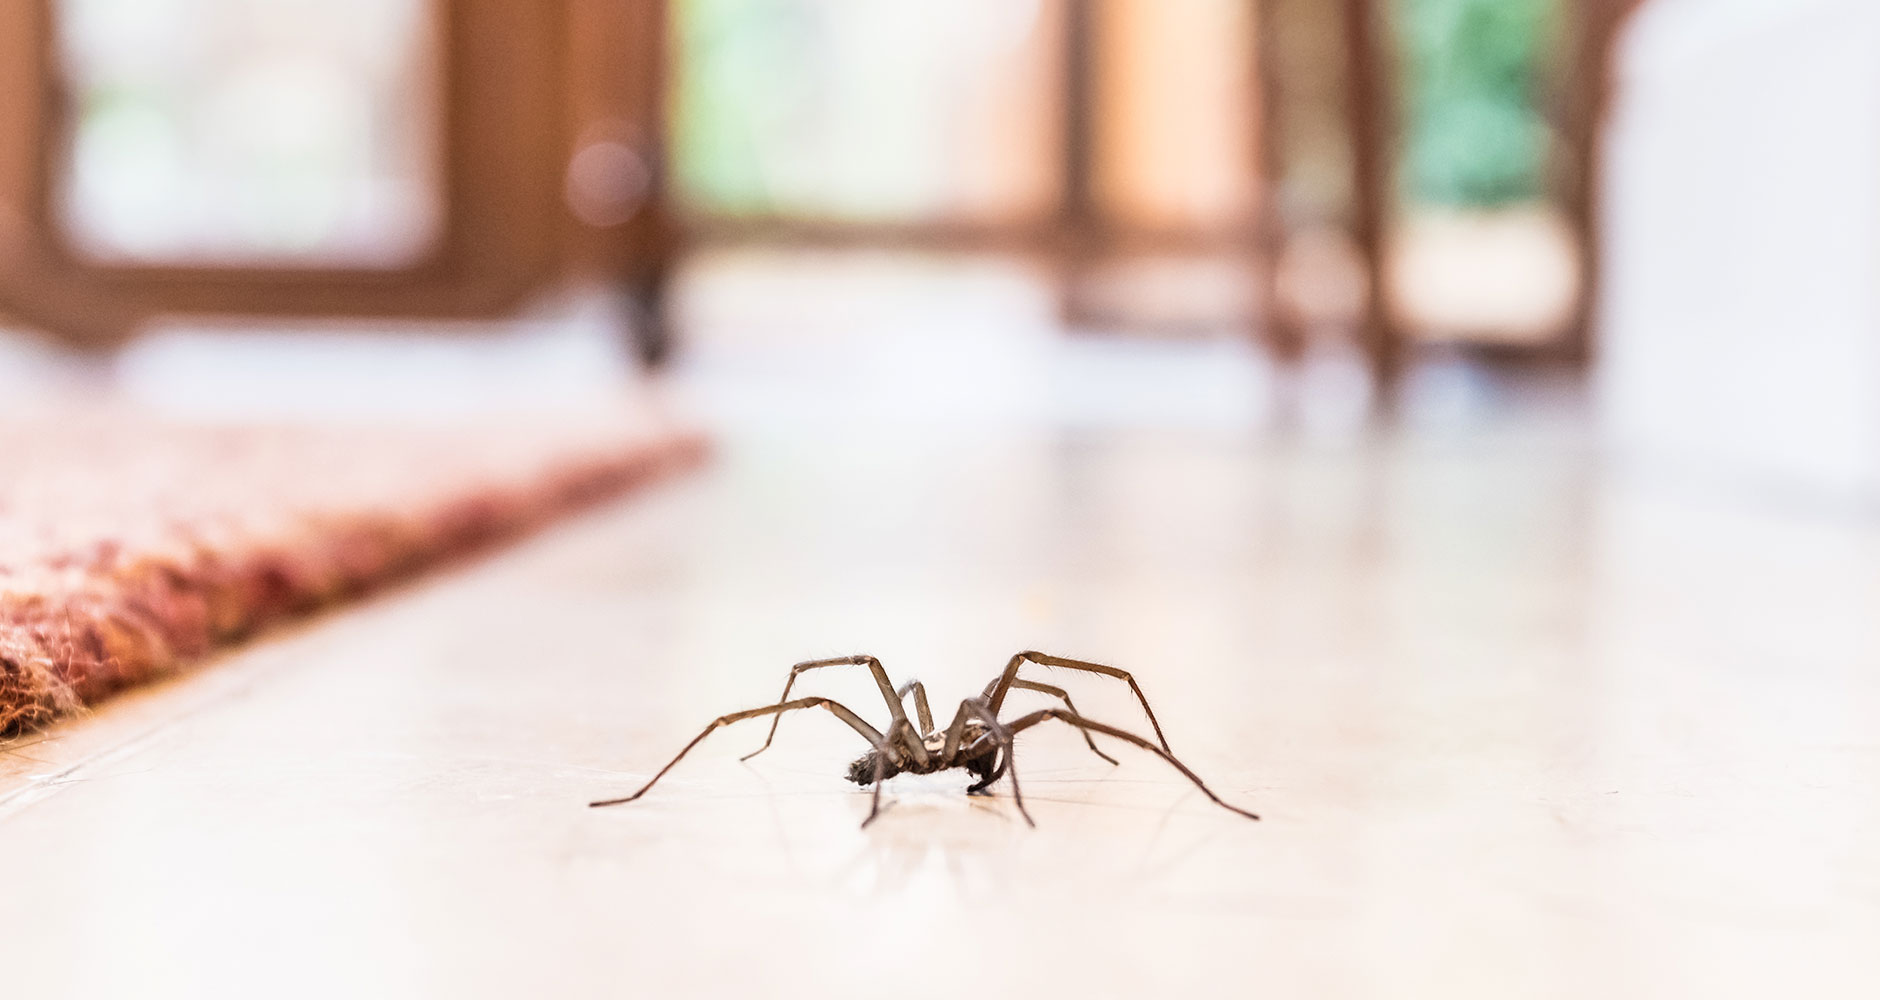 Keep Spiders Out Of Your House With These Repellents?